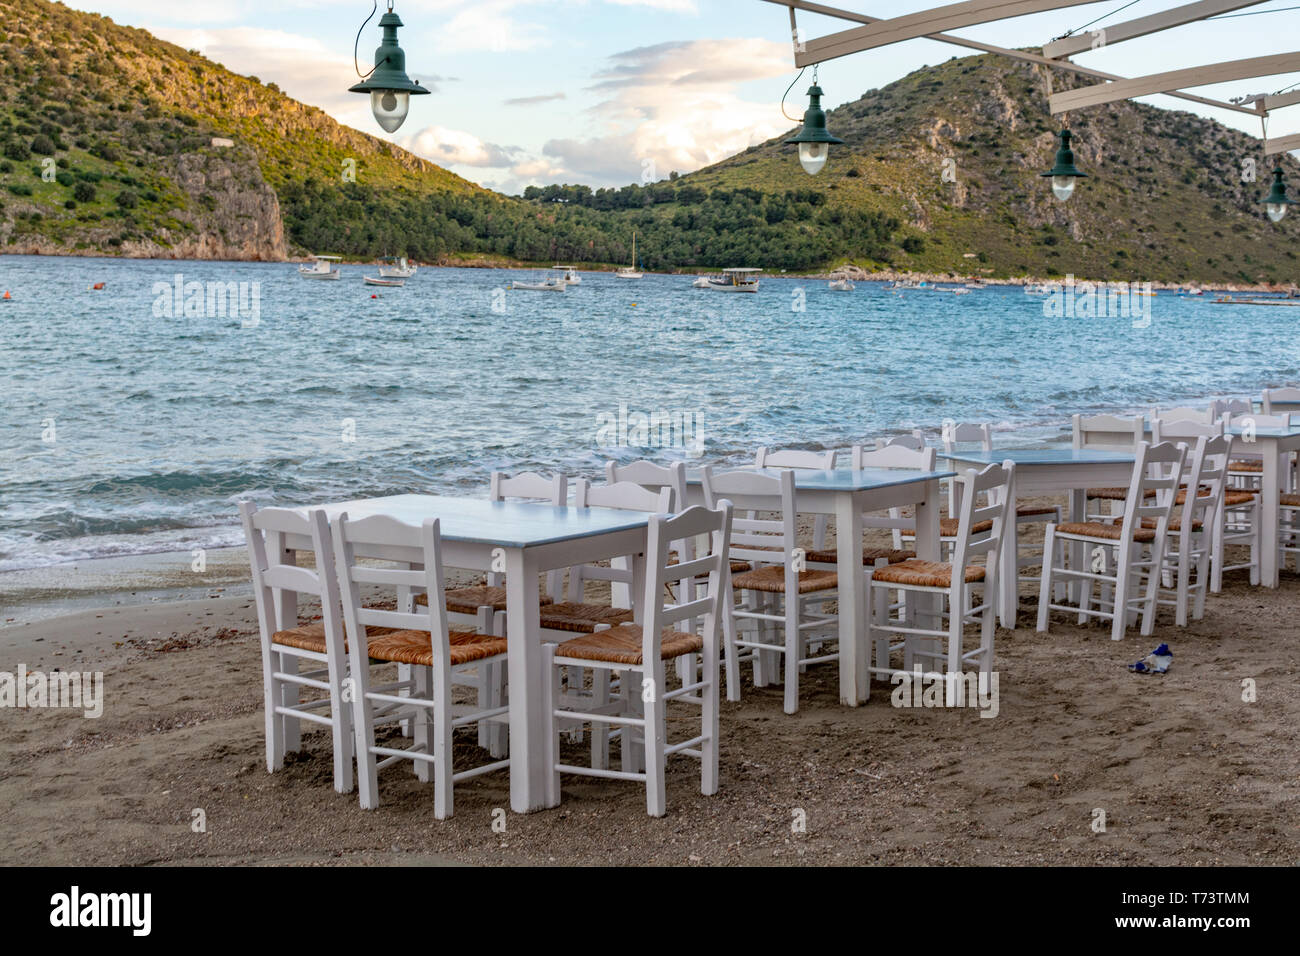 Traditional greek tavern with wooden tables on sandy beach near water waiting for tourists in Tolo, Peloponnese, Greece, vacation season is starting Stock Photo